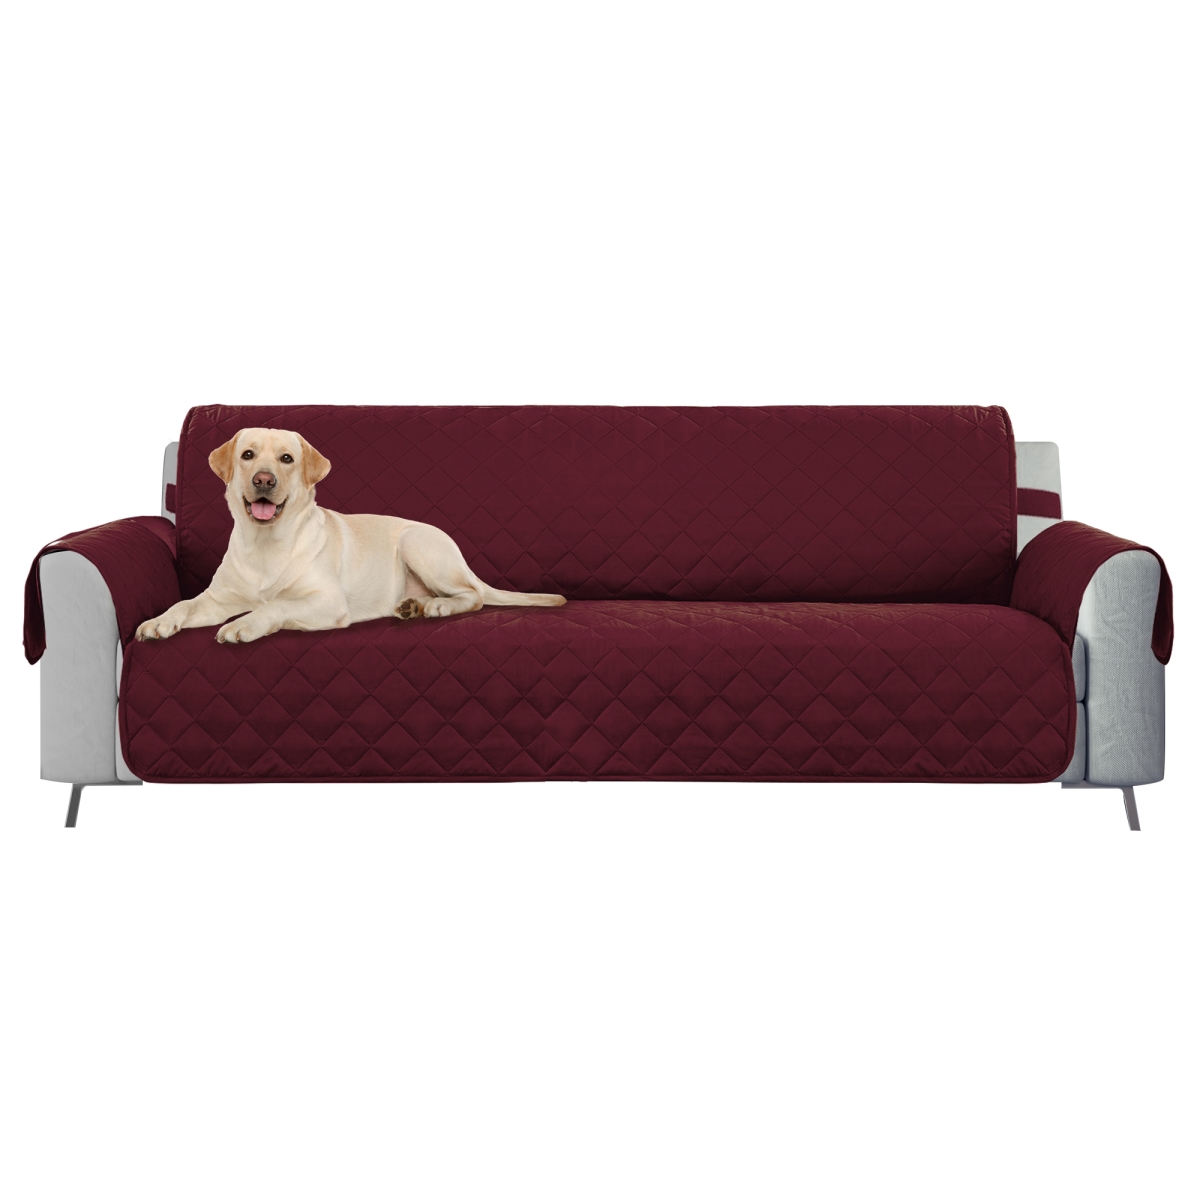 Design Imports Z01678 Dii Reversible Oversize Sofa Cover, Cranberry